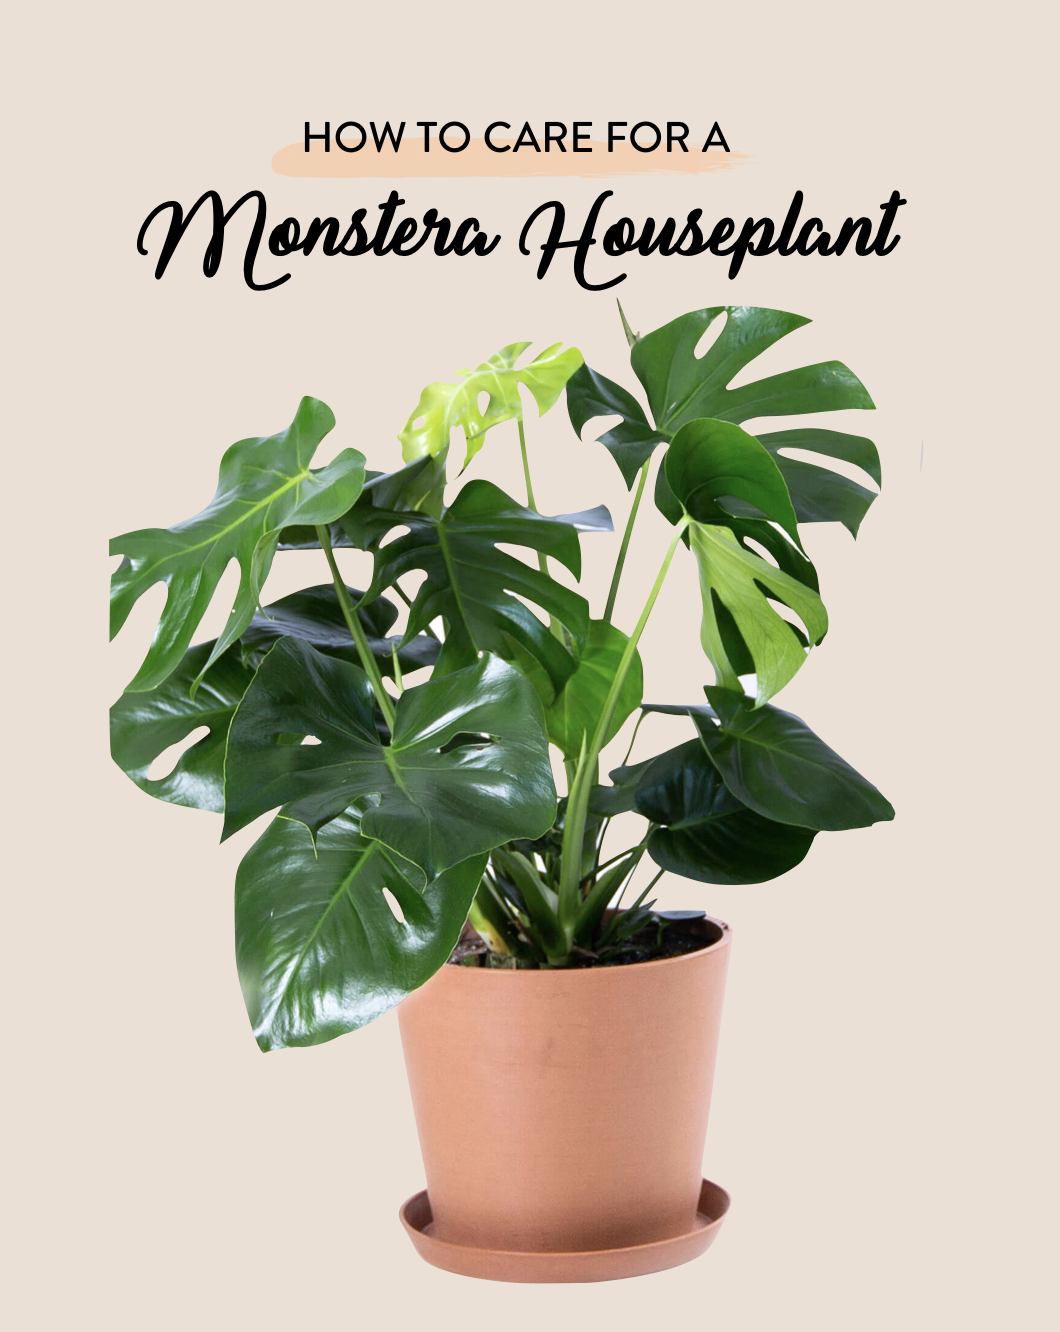 How to care for a monstera plant